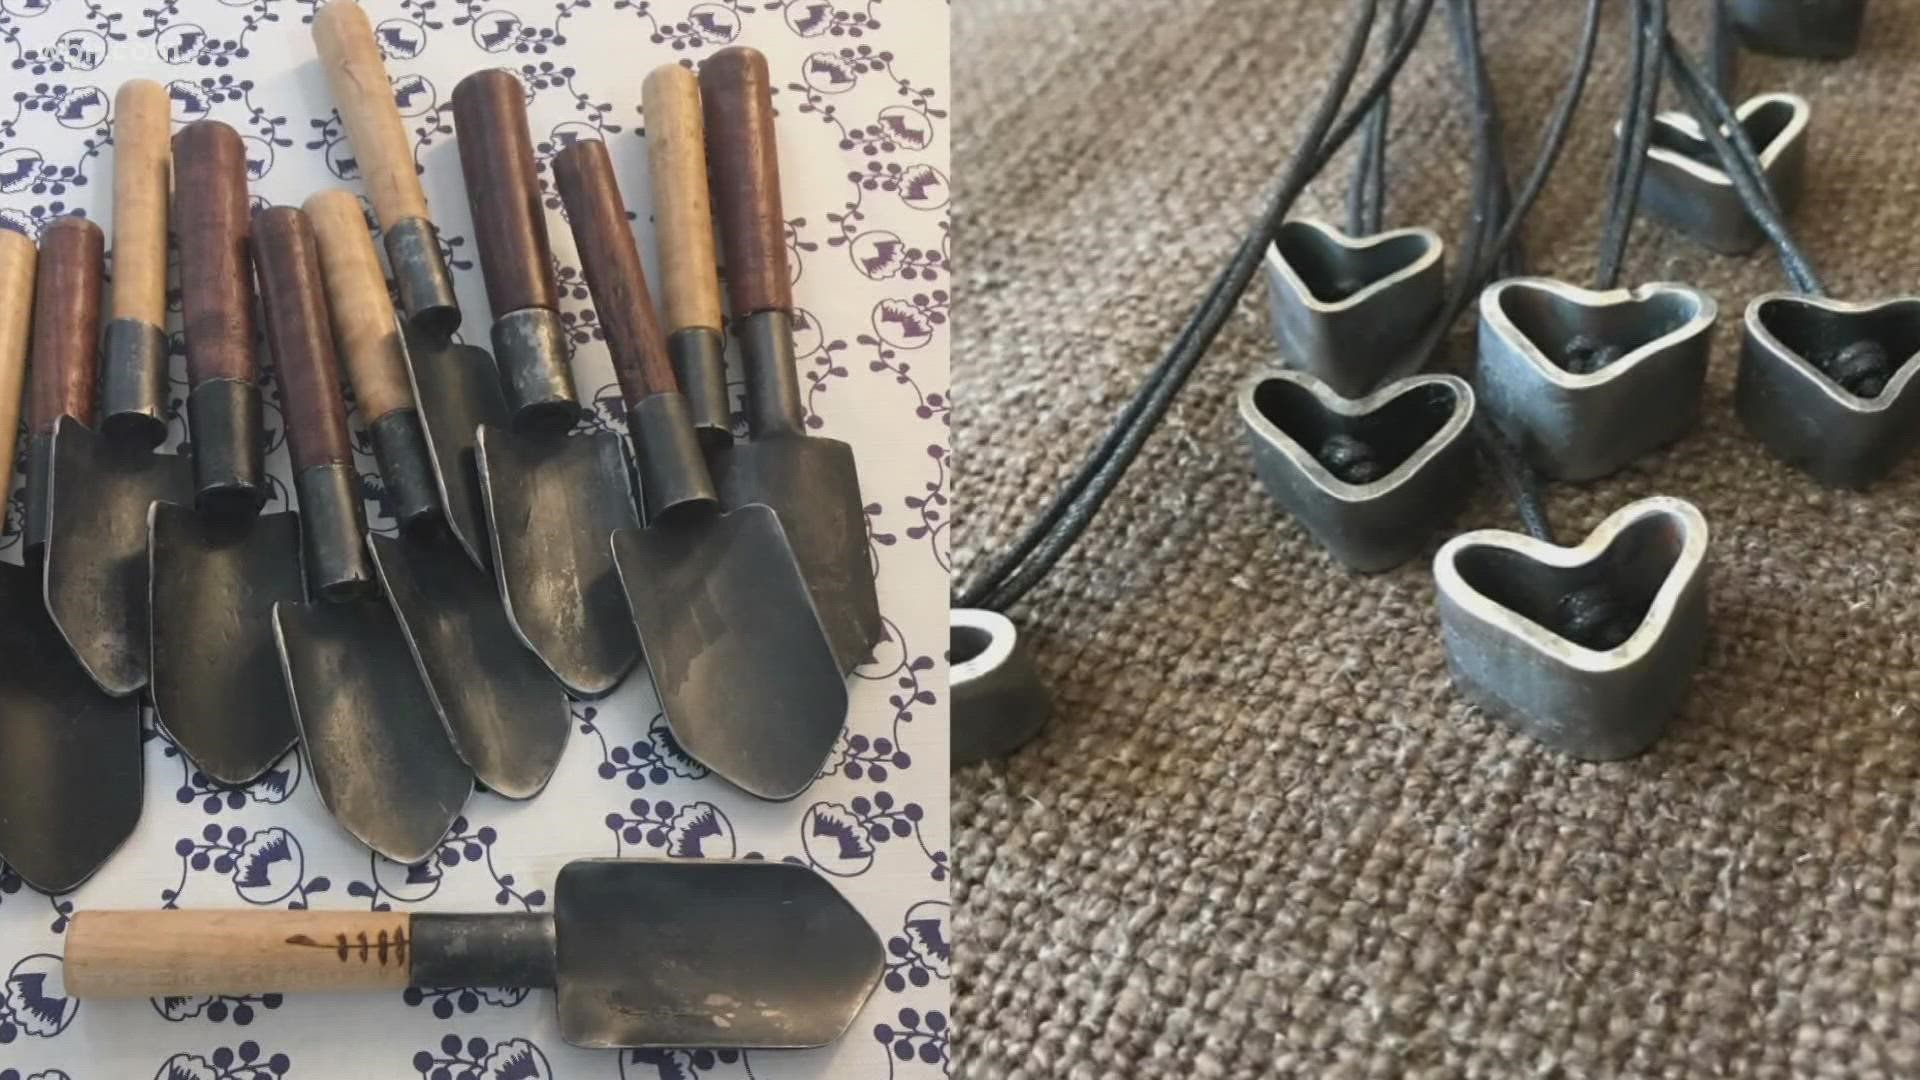 A Maryville native is hammering into the issue of gun violence -- transforming guns into garden tools, hearts and crosses for families of gun violence victims.